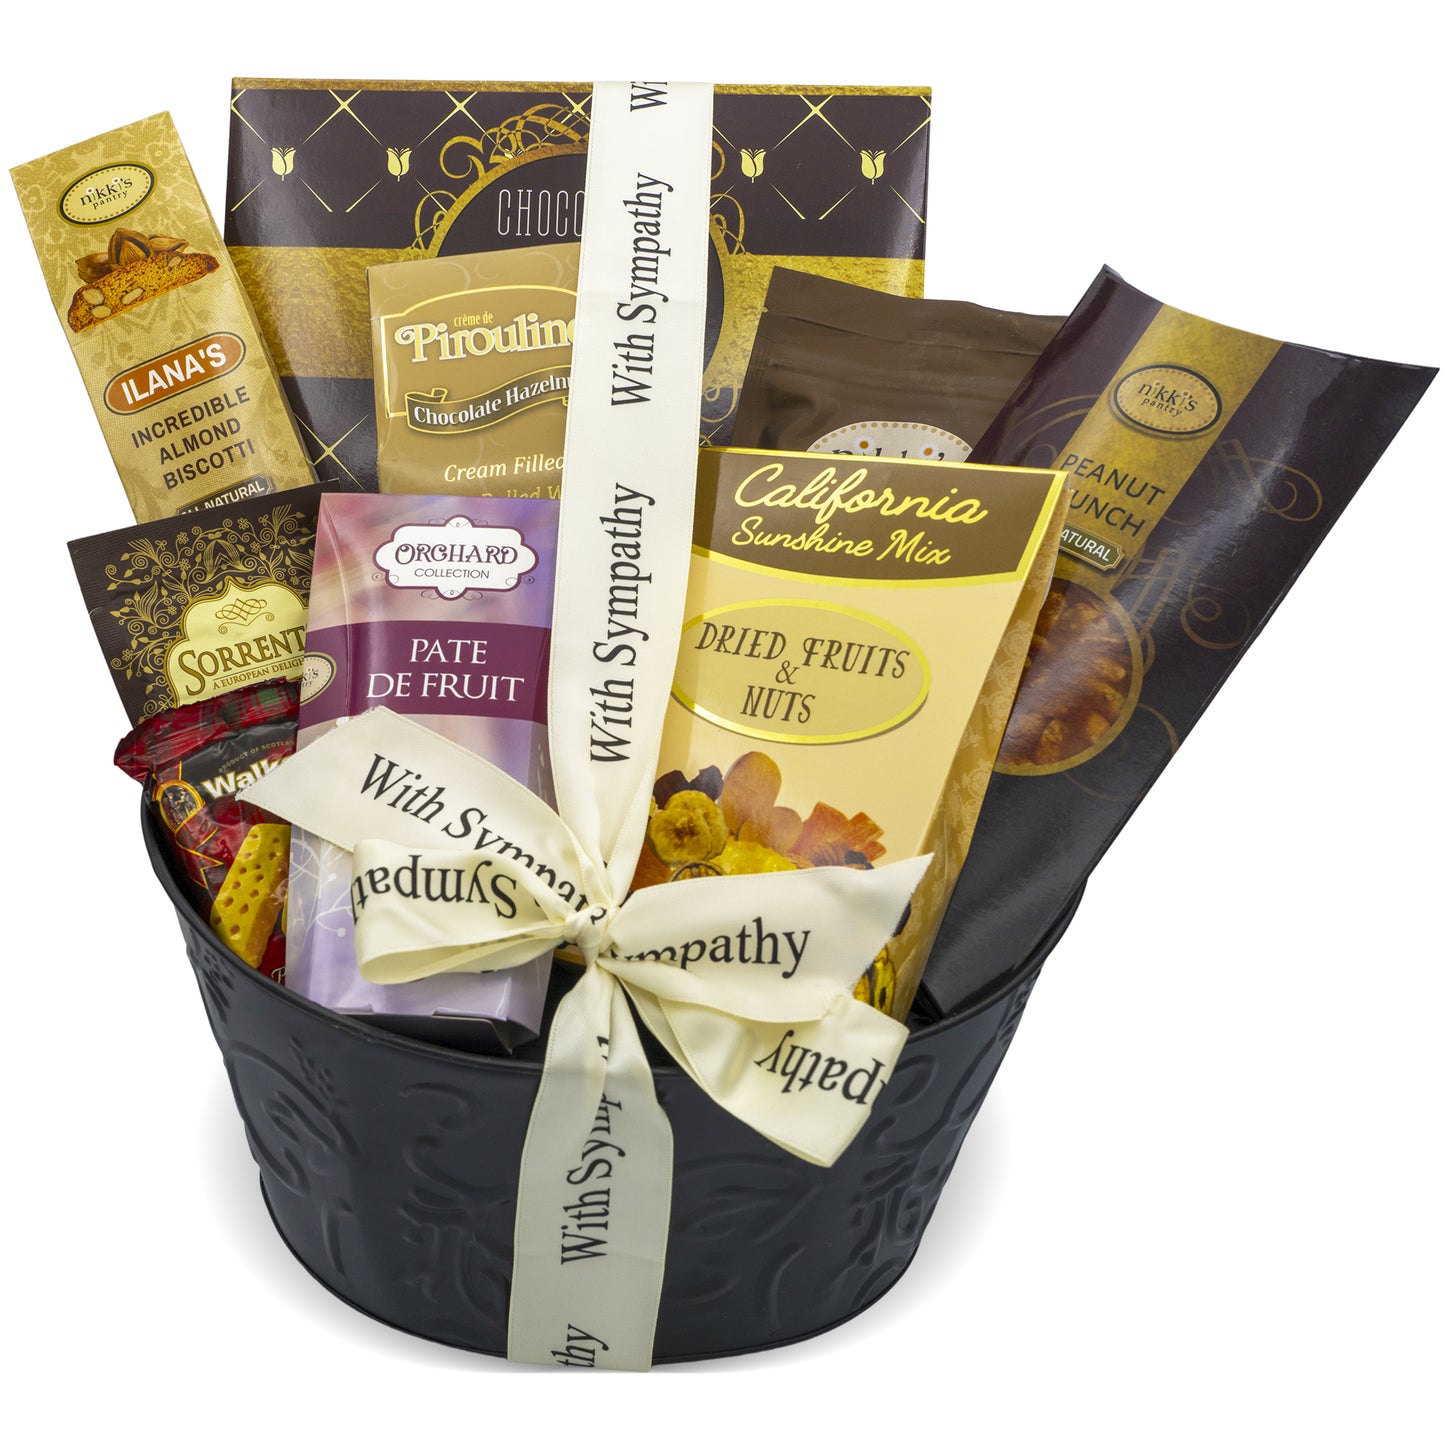 Sincere Sympathy and Condolence Gift Basket, Sympathy Food Basket for Loss of a Loved One, Gourmet & Beautifully Arranged Funeral Basket, Bereavement Care Package for Mourning and Grieving